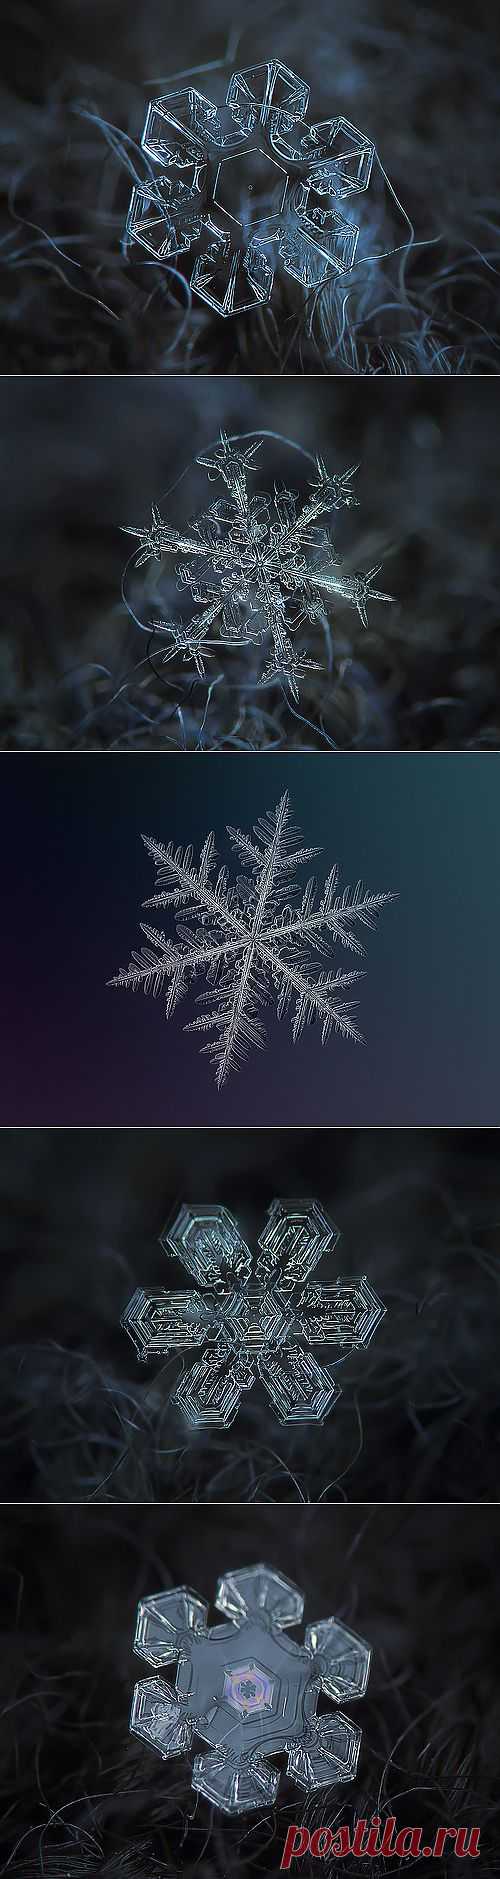 Snowflakes and snow crystals - a set on Flickr